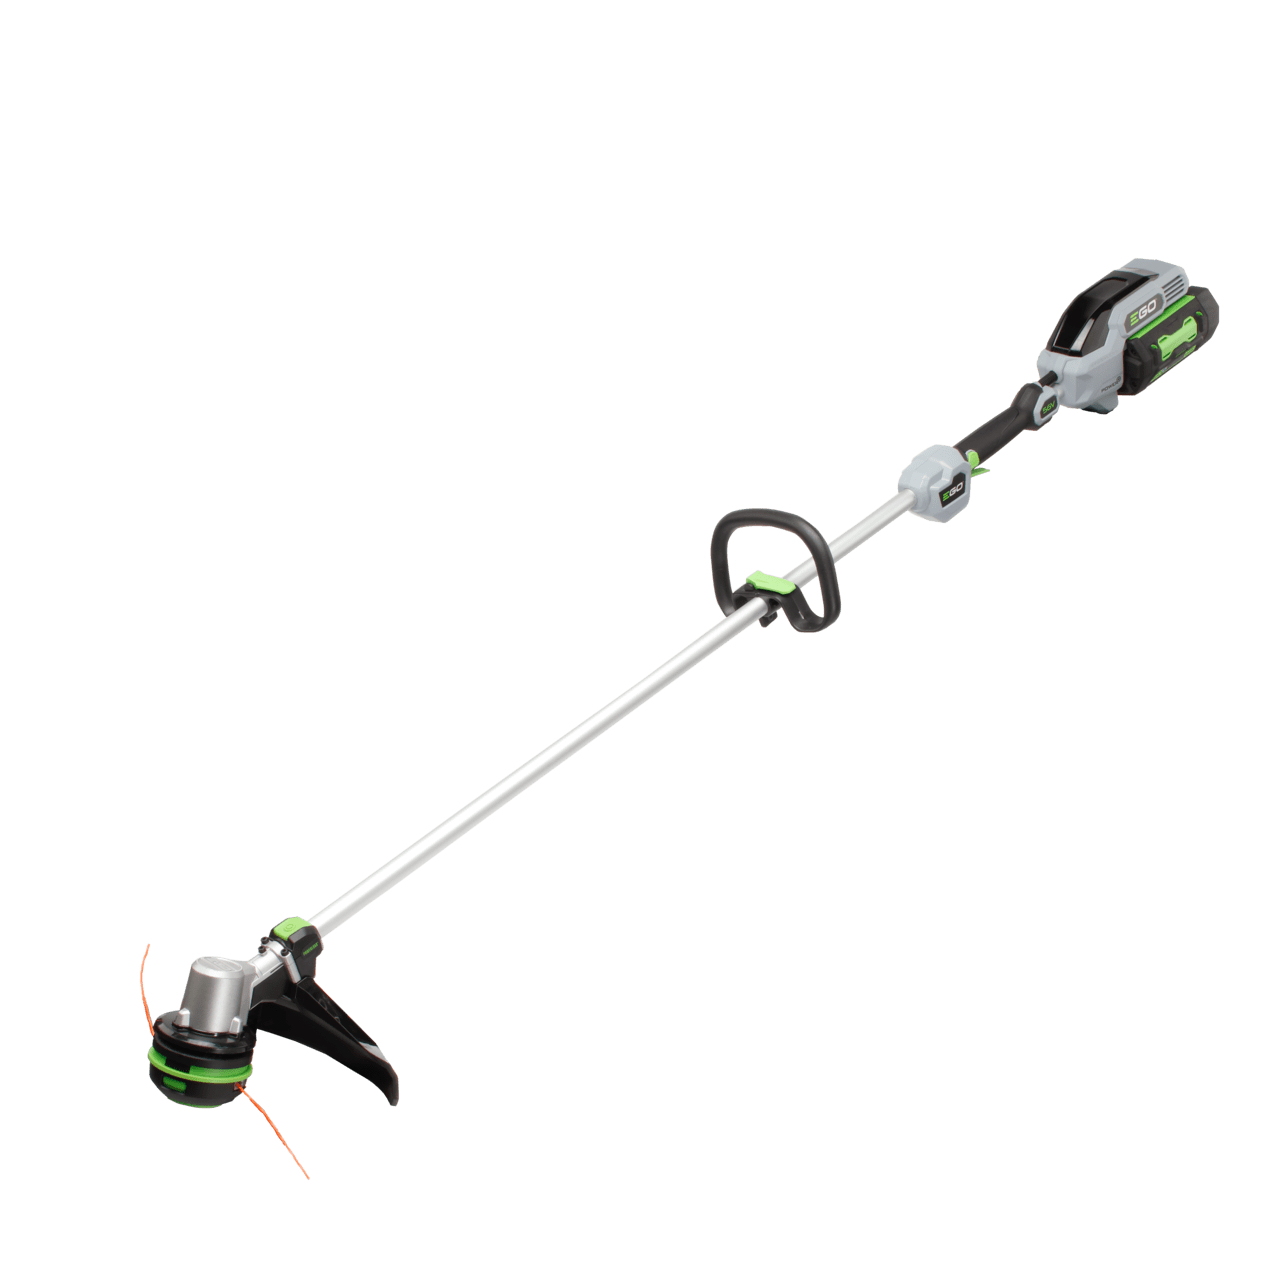 ego-st1510e-loop-handled-line-trimmer;-brushless-motor;-powerload-cutting-head-bare-tool